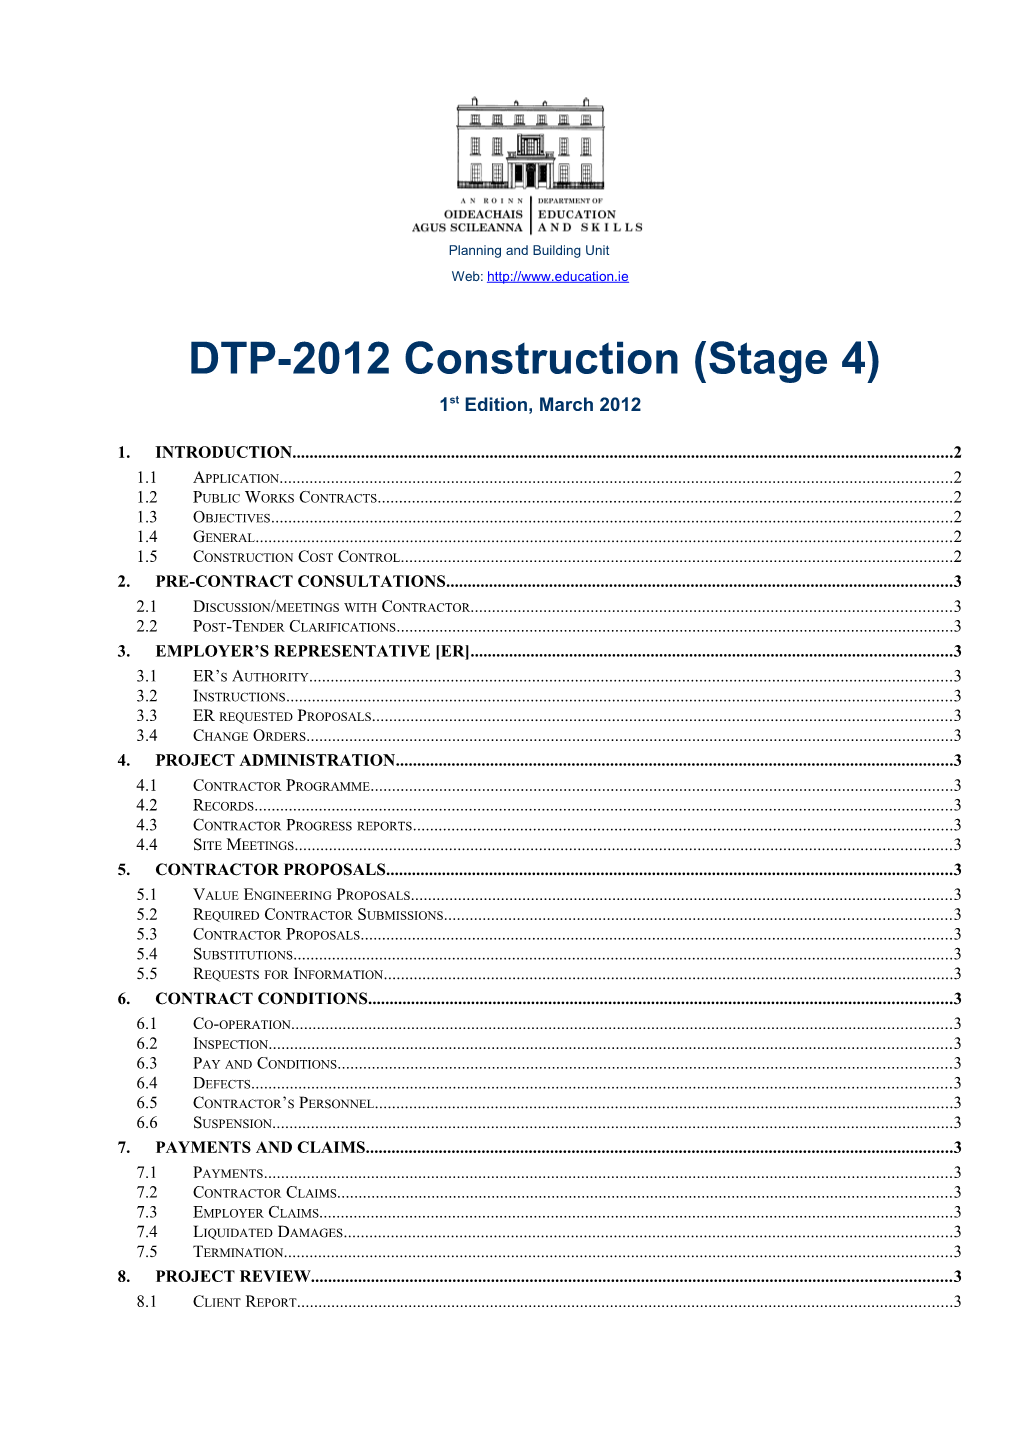 DTP-2012 Construction Stage 4 1St Edition March 2012